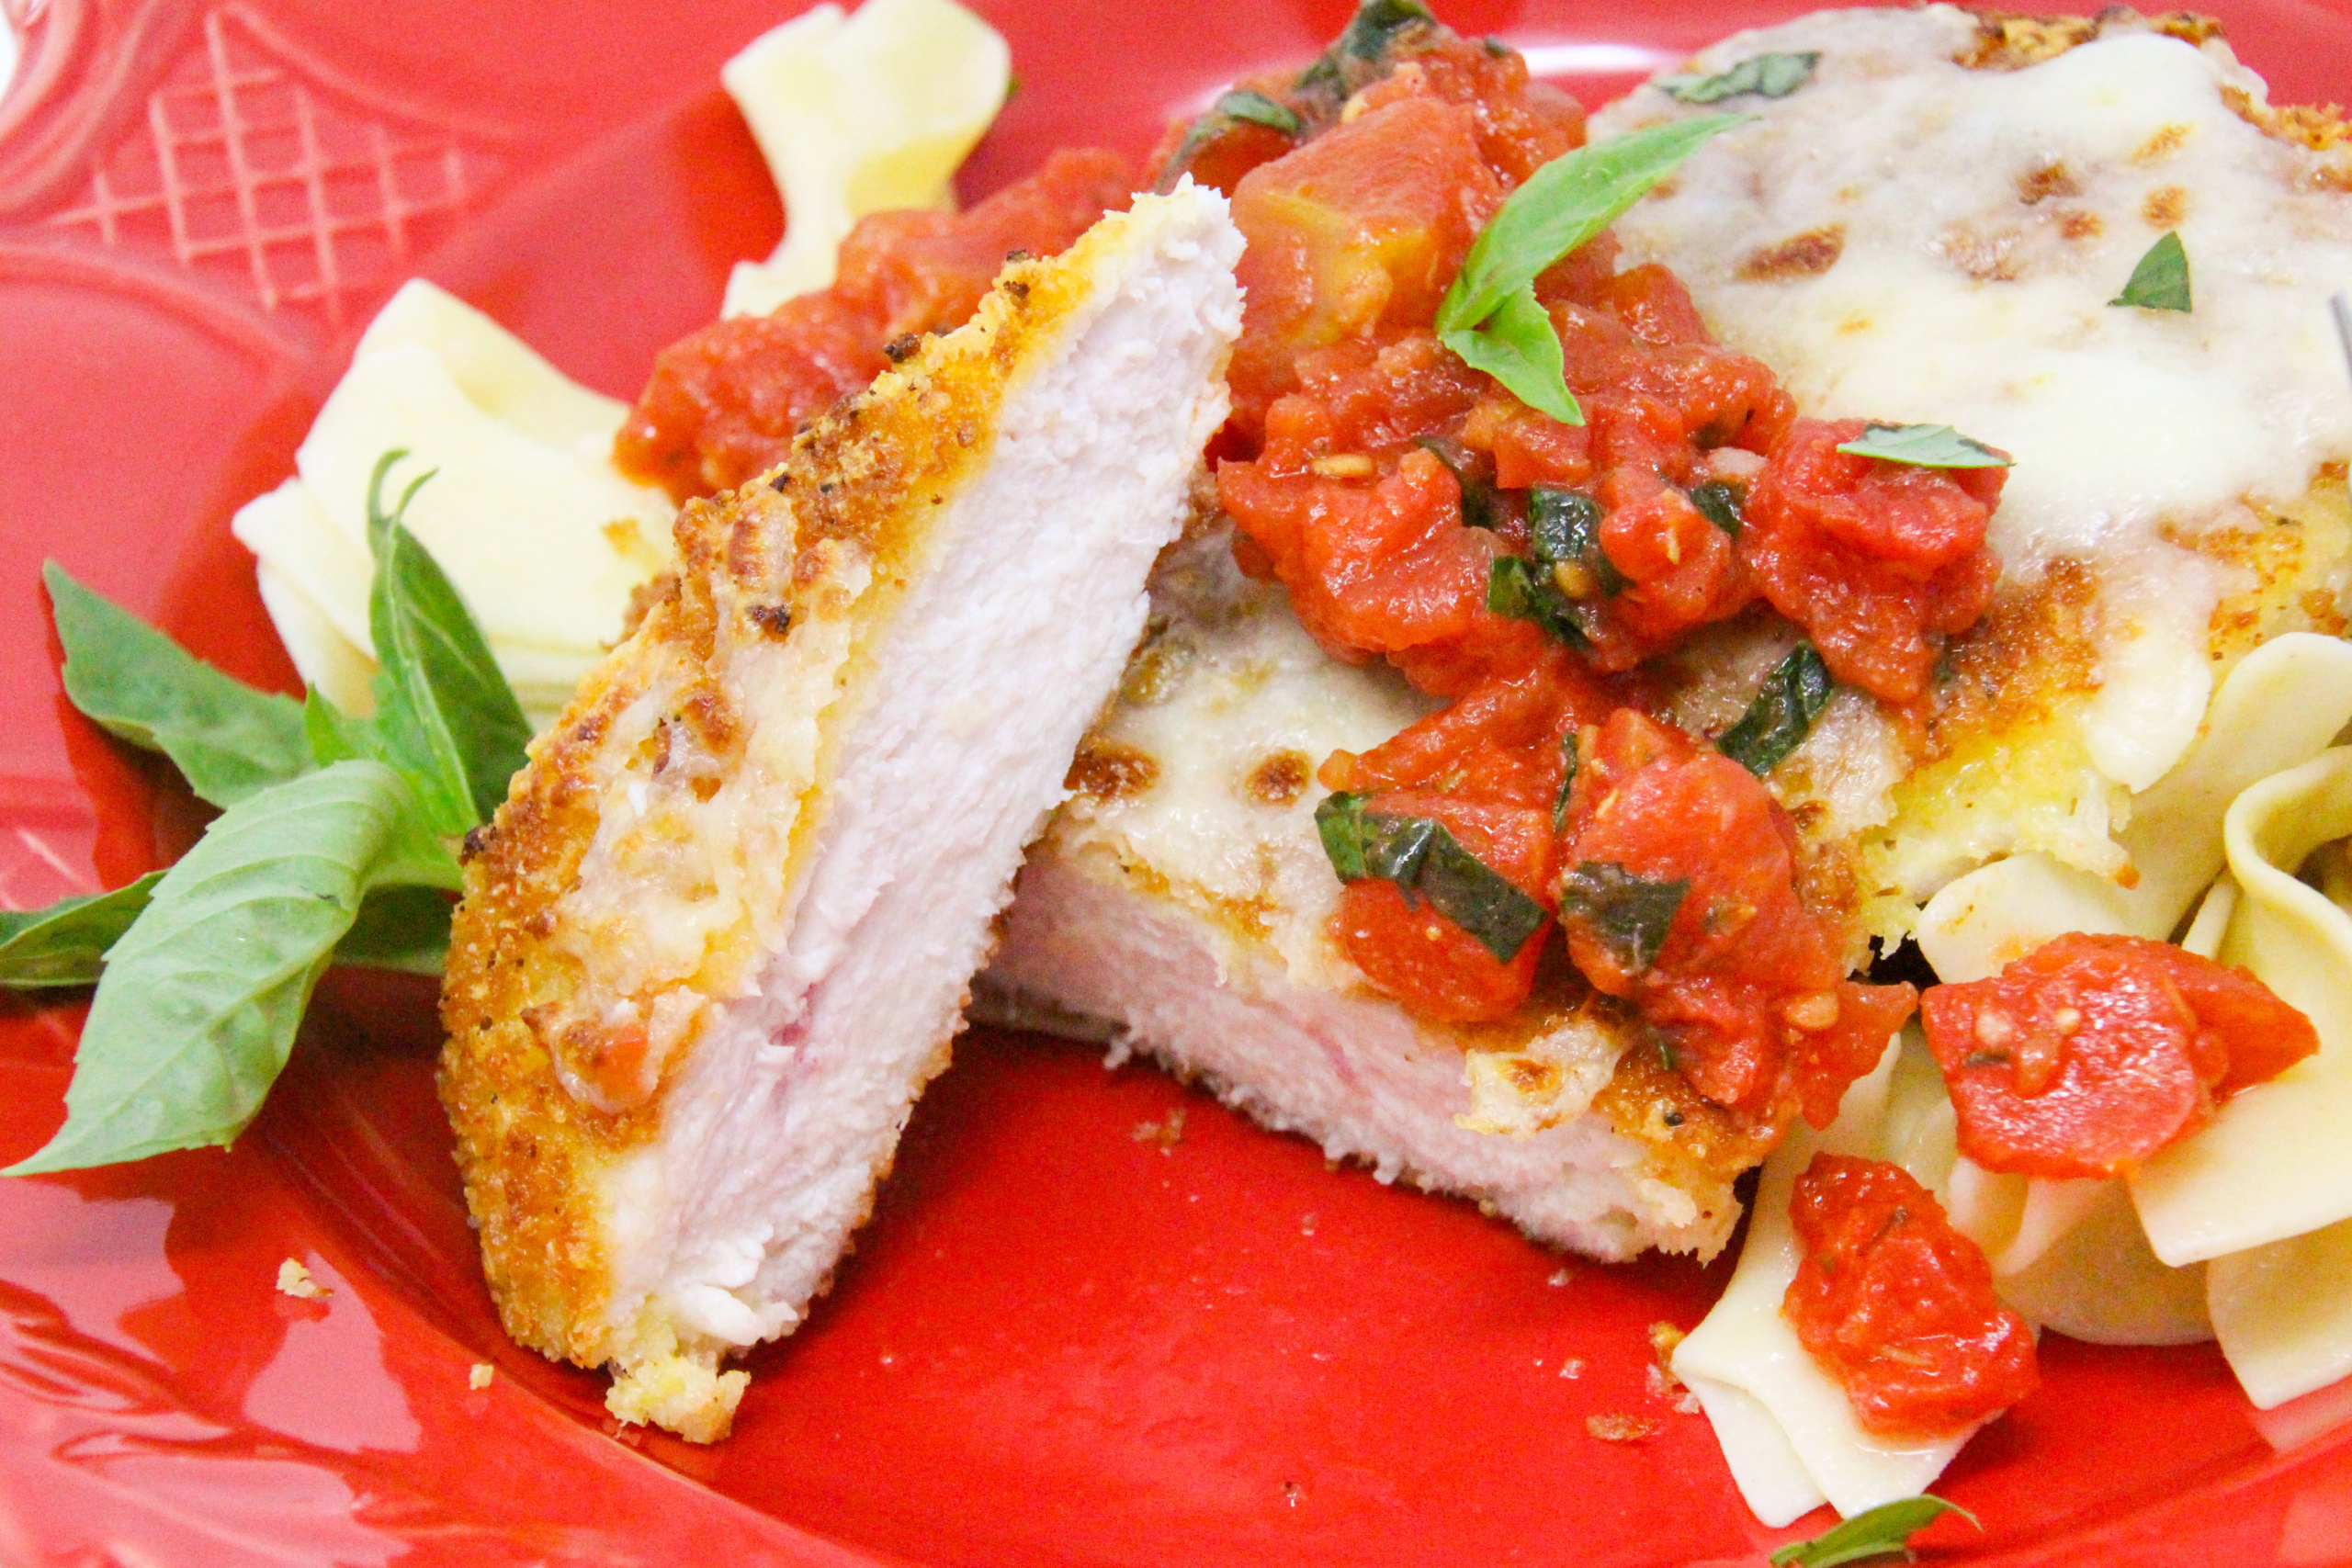 This Chicken Parmesan recipe relies on panko bread crumbs and Parmesan cheese to keep the crust crispy. Topped with melty mozzarella and a simple tomato-basil sauce, this dinner dish will be sure to appeal to the pickiest of eaters. Recipe created by Cinnamon & Sugar. 